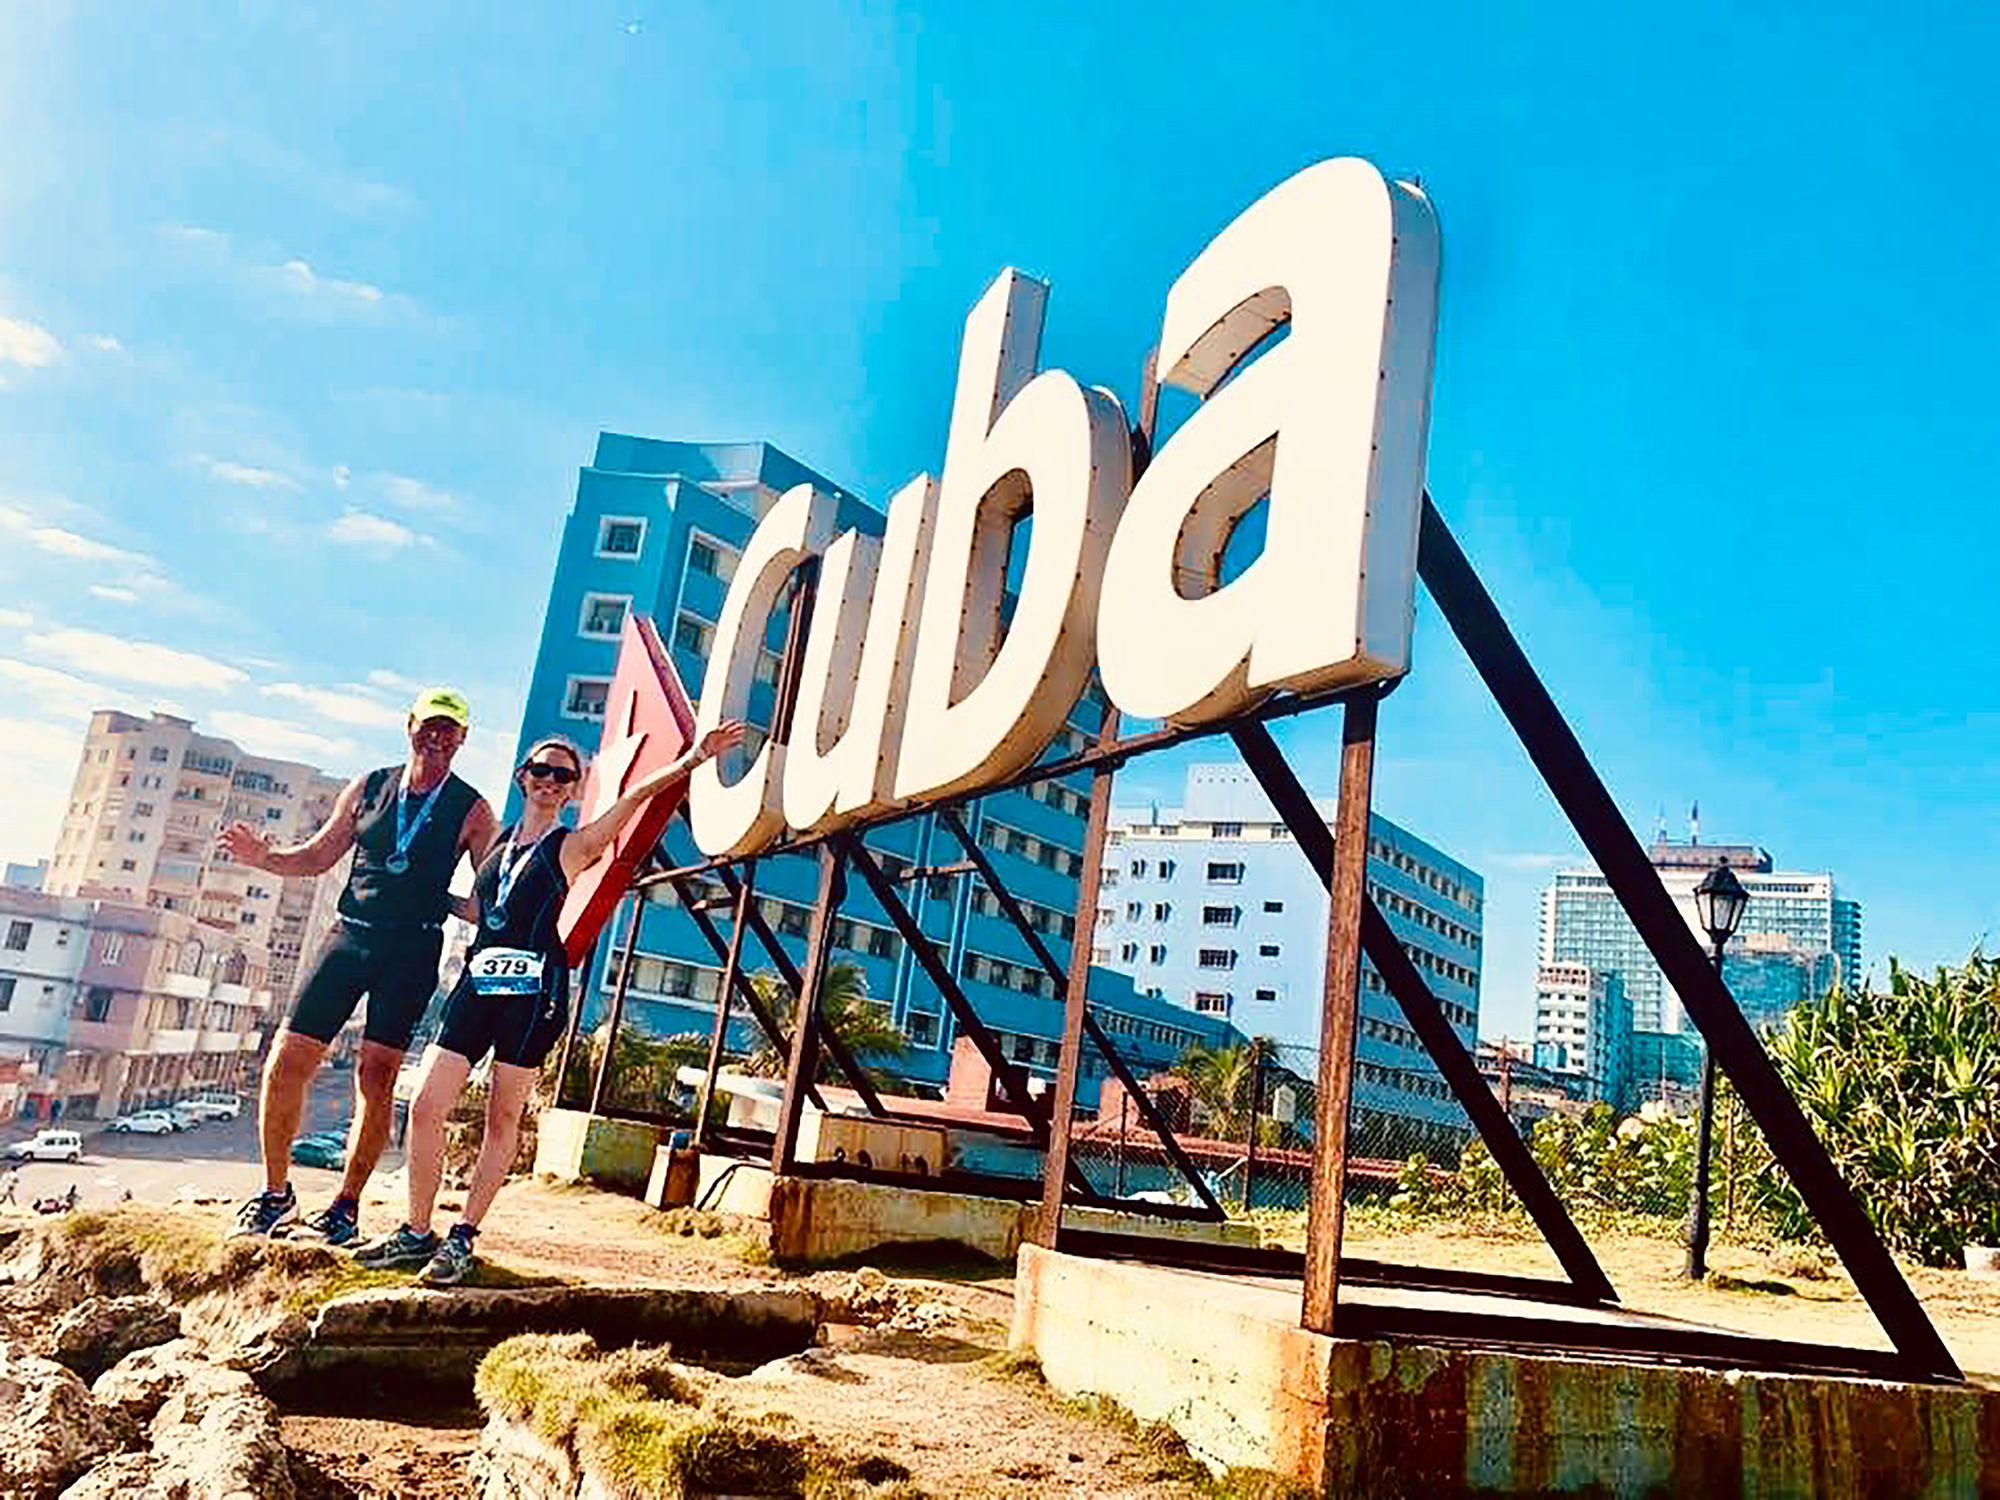 Courtesy. Chelsea Gruber and her dad, Bob, traveled to Cuba in 2019 to compete in a triathlon.